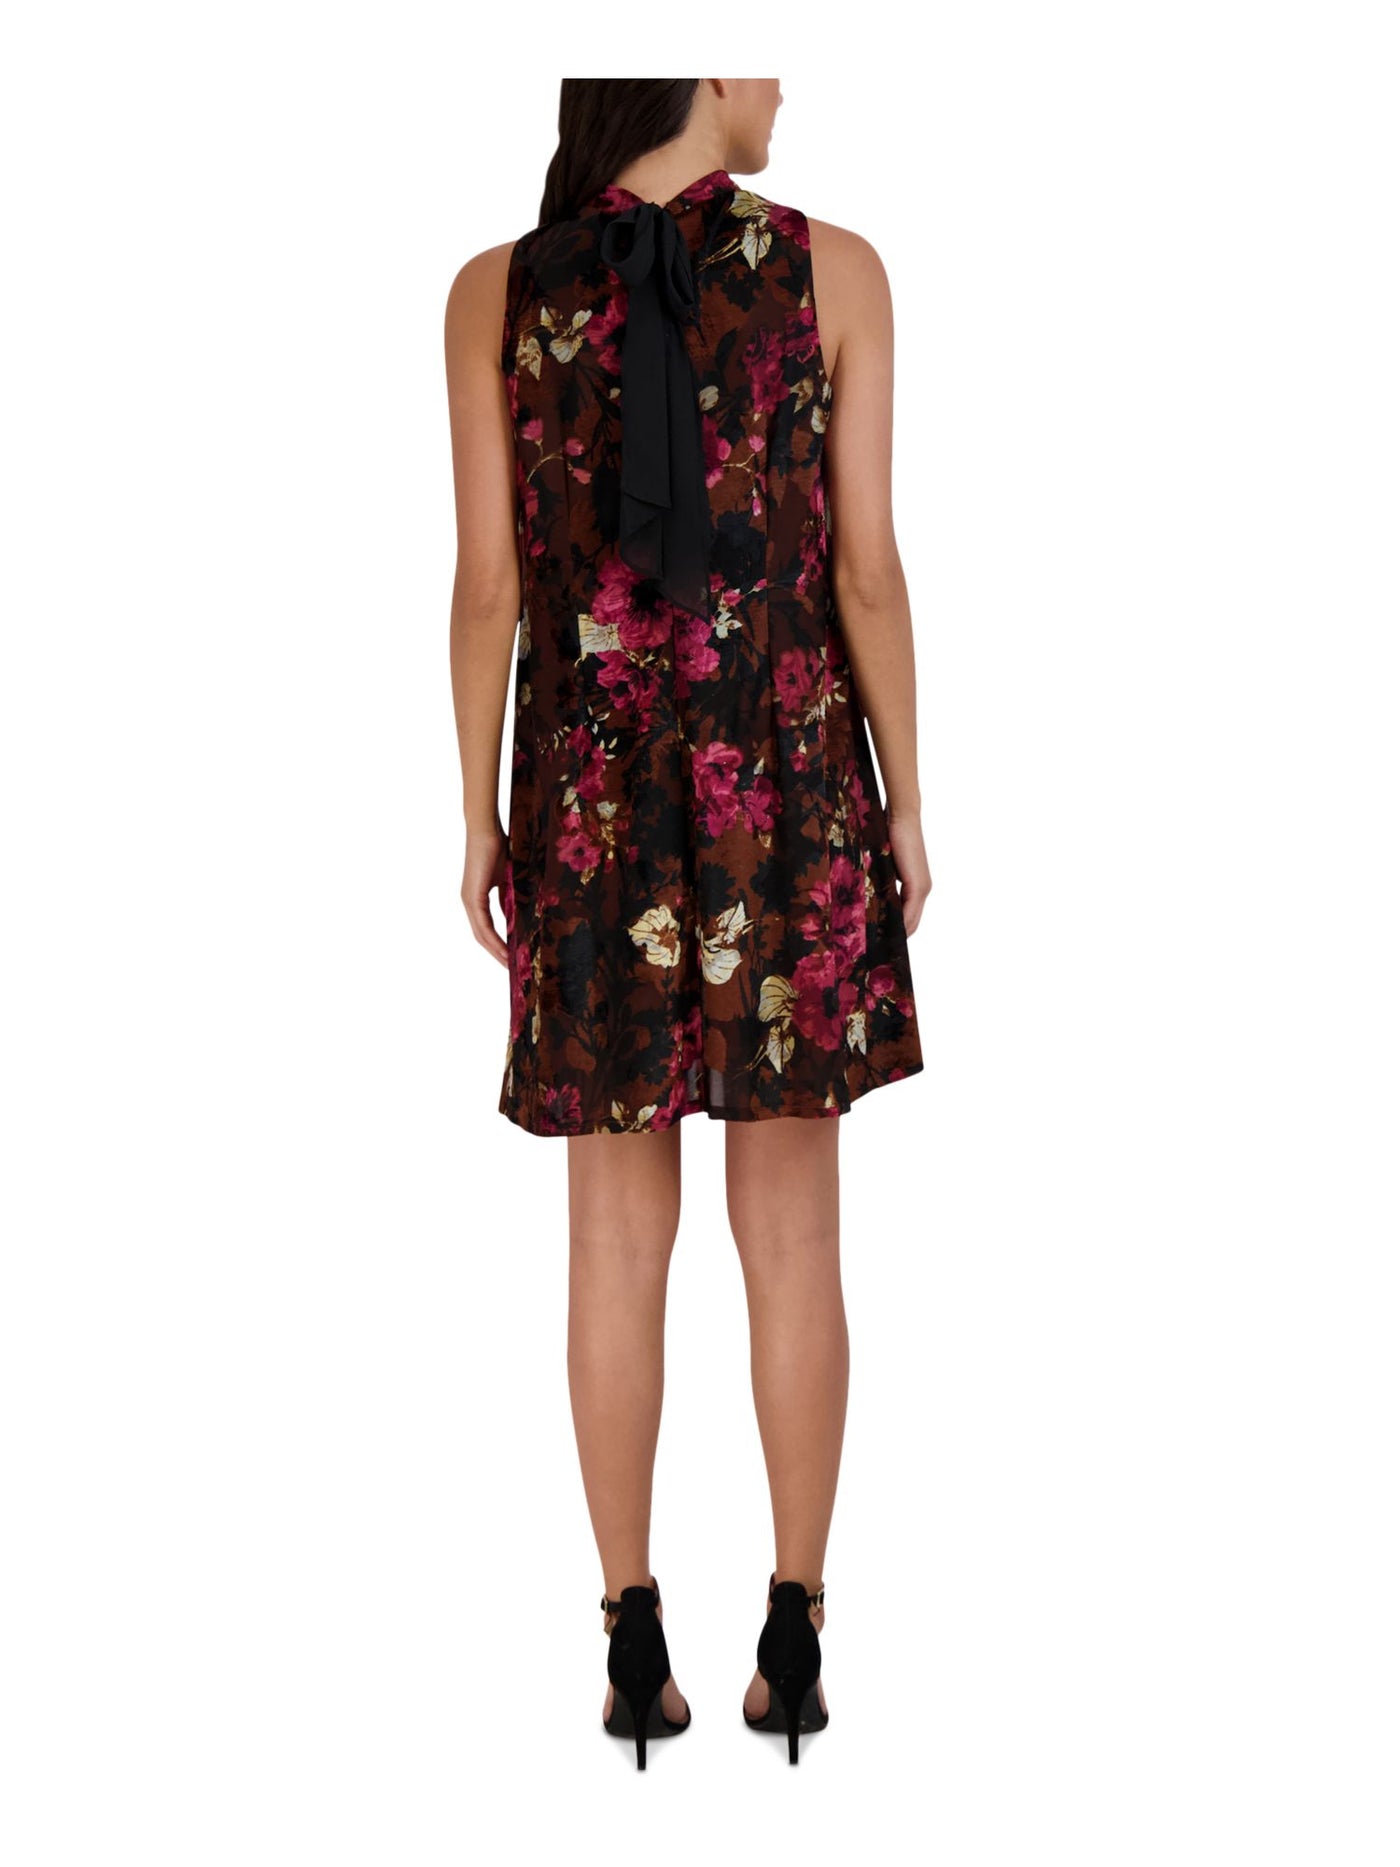 SIGNATURE BY ROBBIE BEE Womens Black Lined Floral Sleeveless Halter Above The Knee Cocktail Shift Dress Petites PS